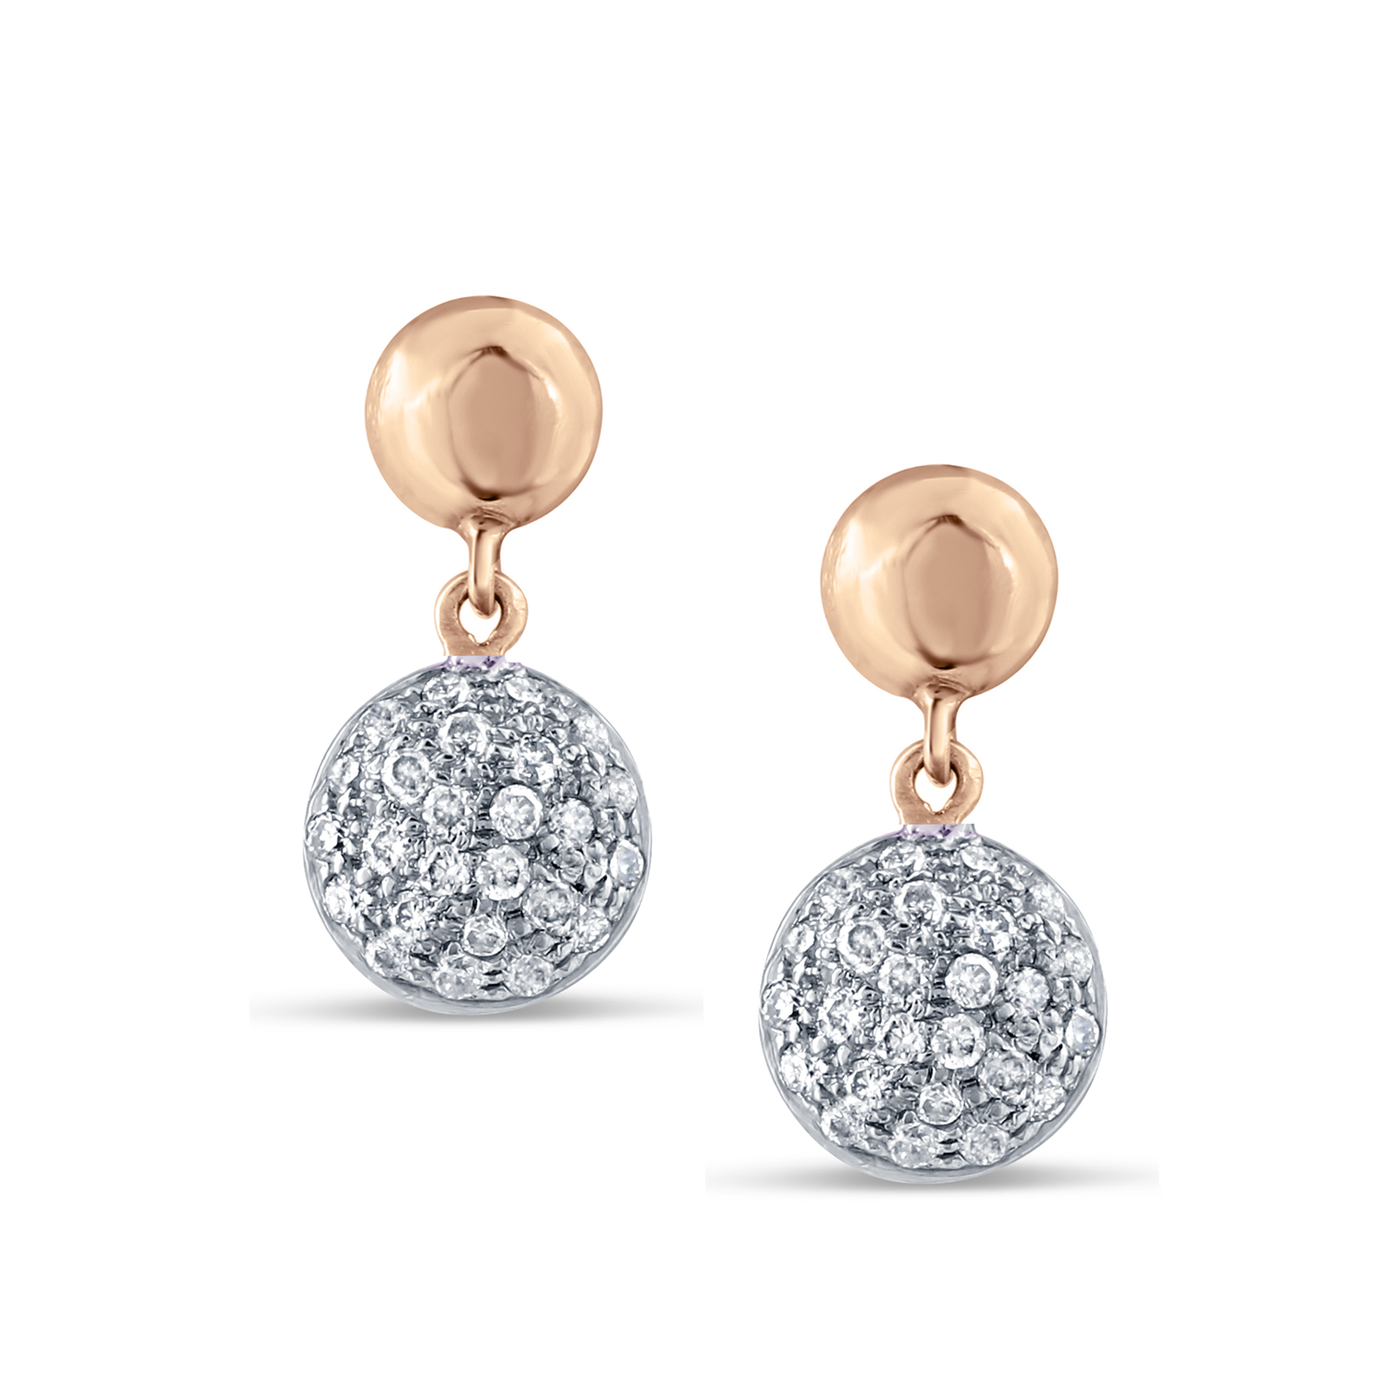 Lente Two Tier Earrings with Pave Diamond in 18k Yellow Gold